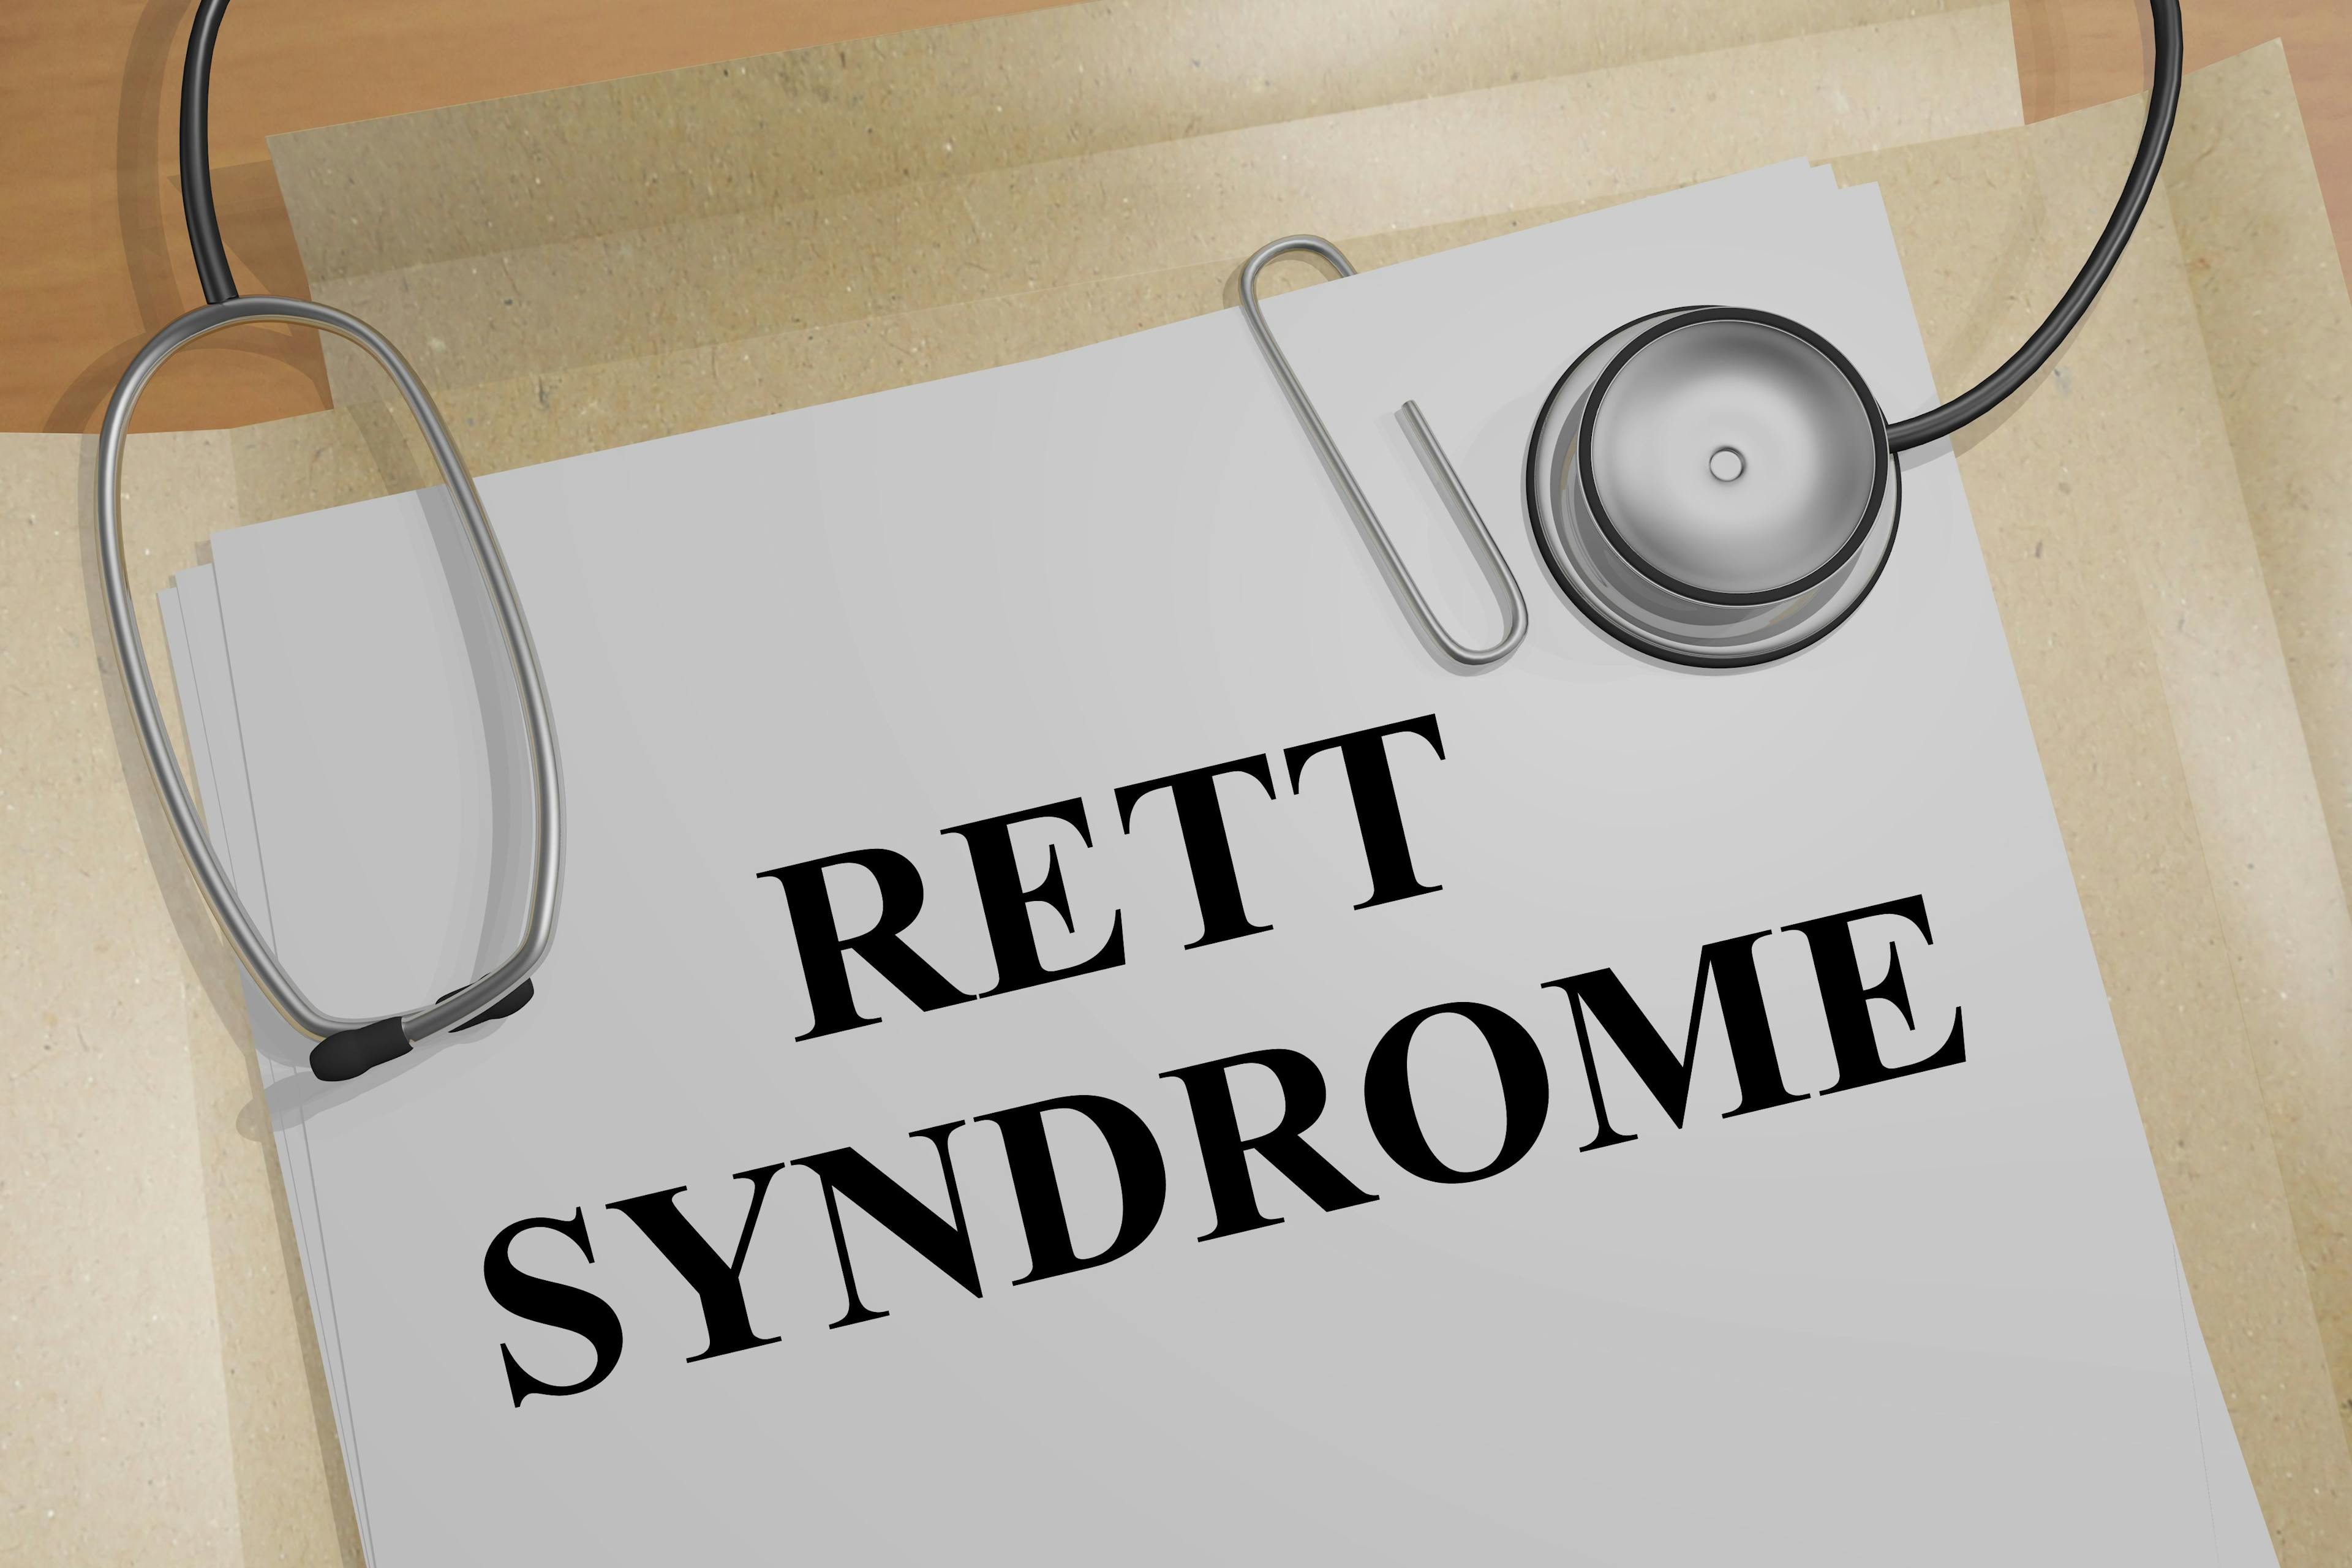 New Rett Syndrome Treatment Heralded But With Some Concerns  | Asembia Specialty Pharmacy Summit